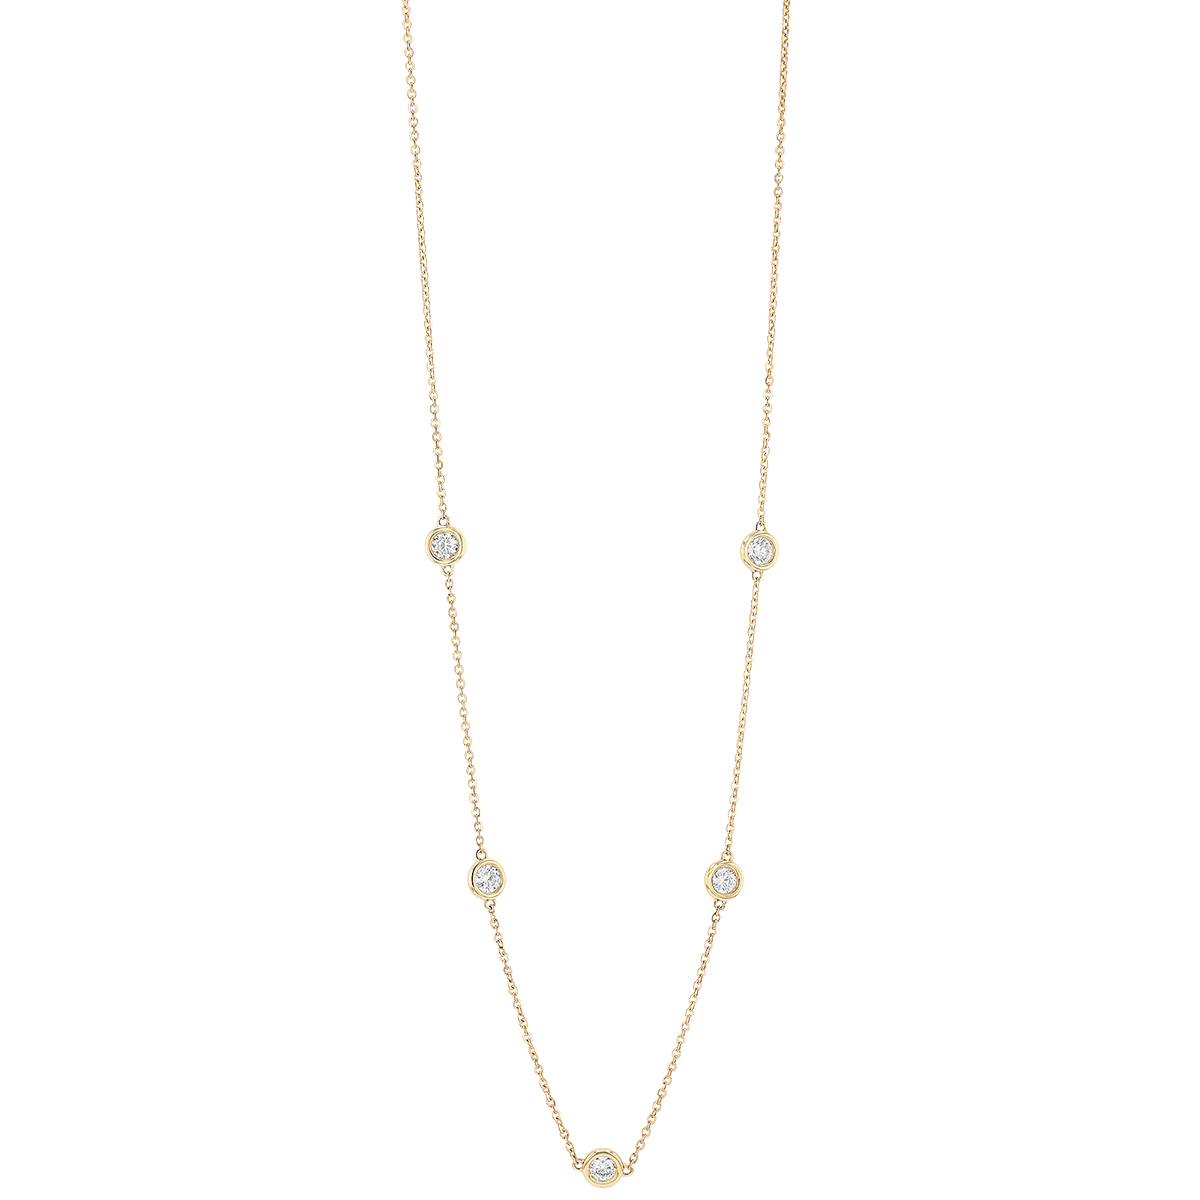 Borsheims Signature Collection Diamond 5 Station Necklace in Yellow ...